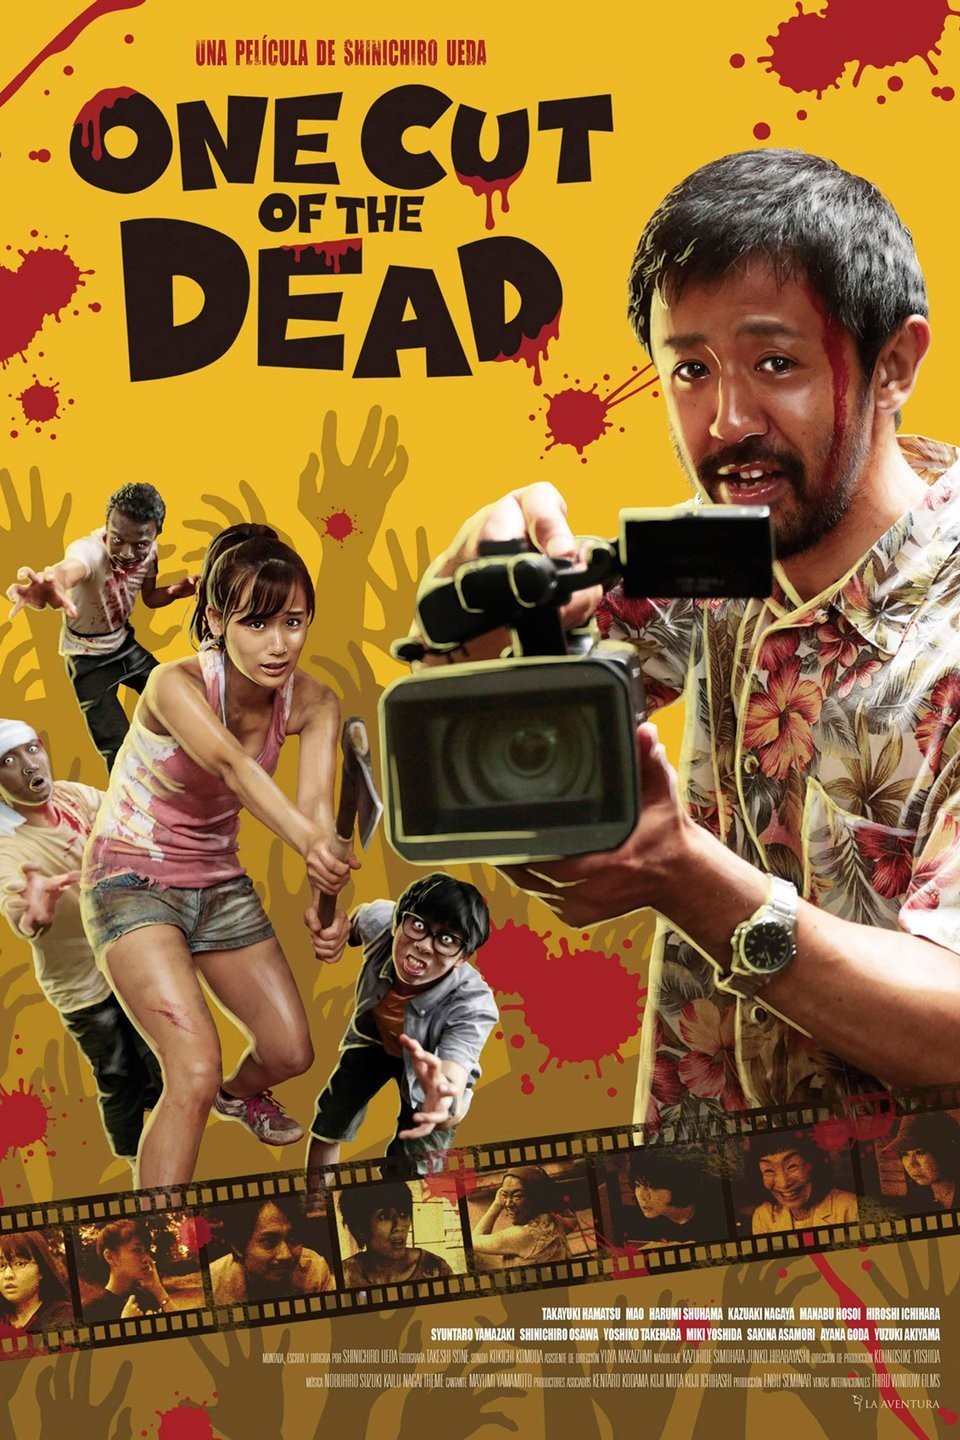 Cut Land Move - One Cut of the Dead | Rotten Tomatoes